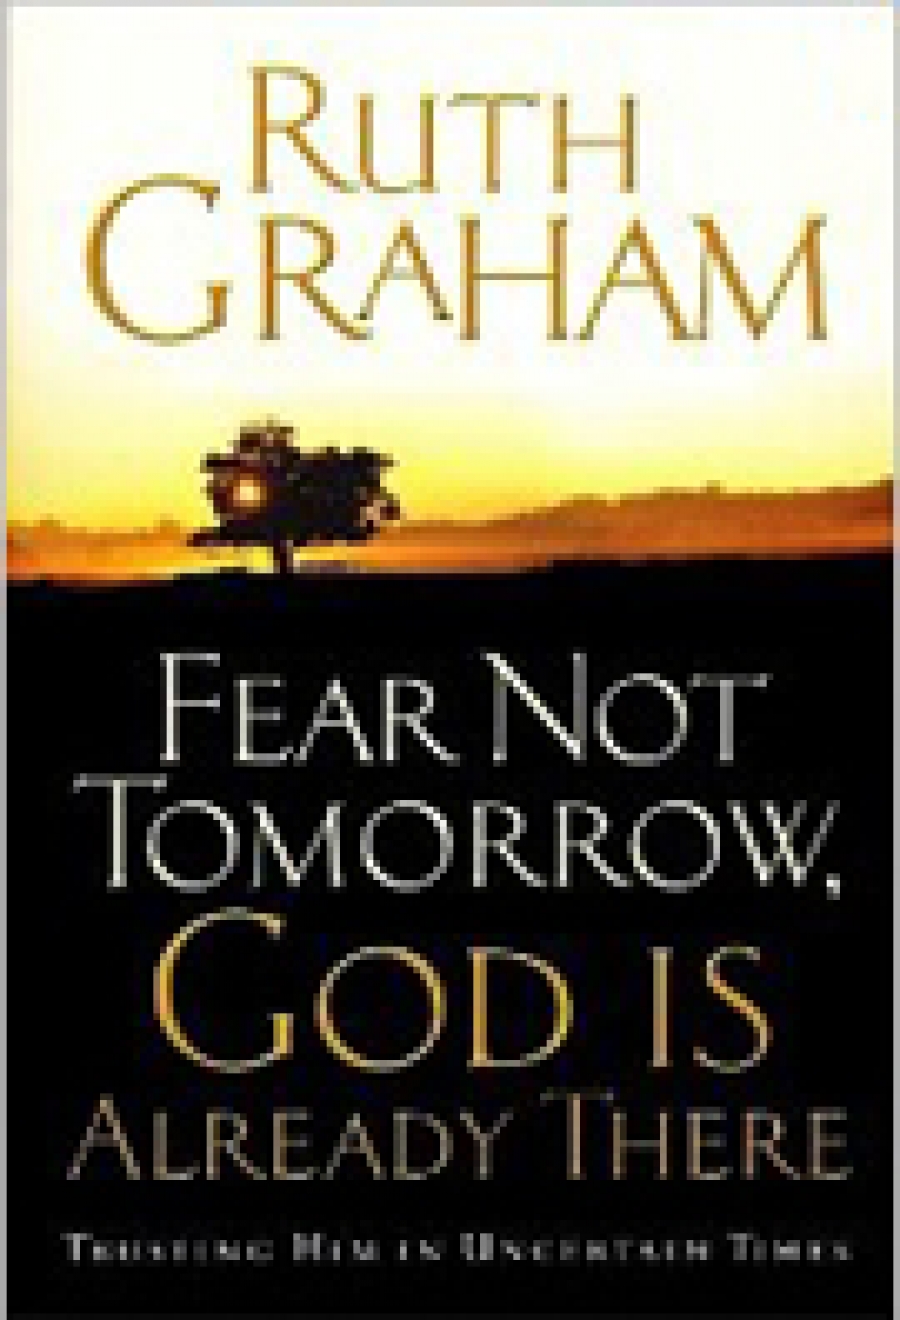 Fear Not Tomorrow, God Is Already There Trusting Him in Uncertain Times